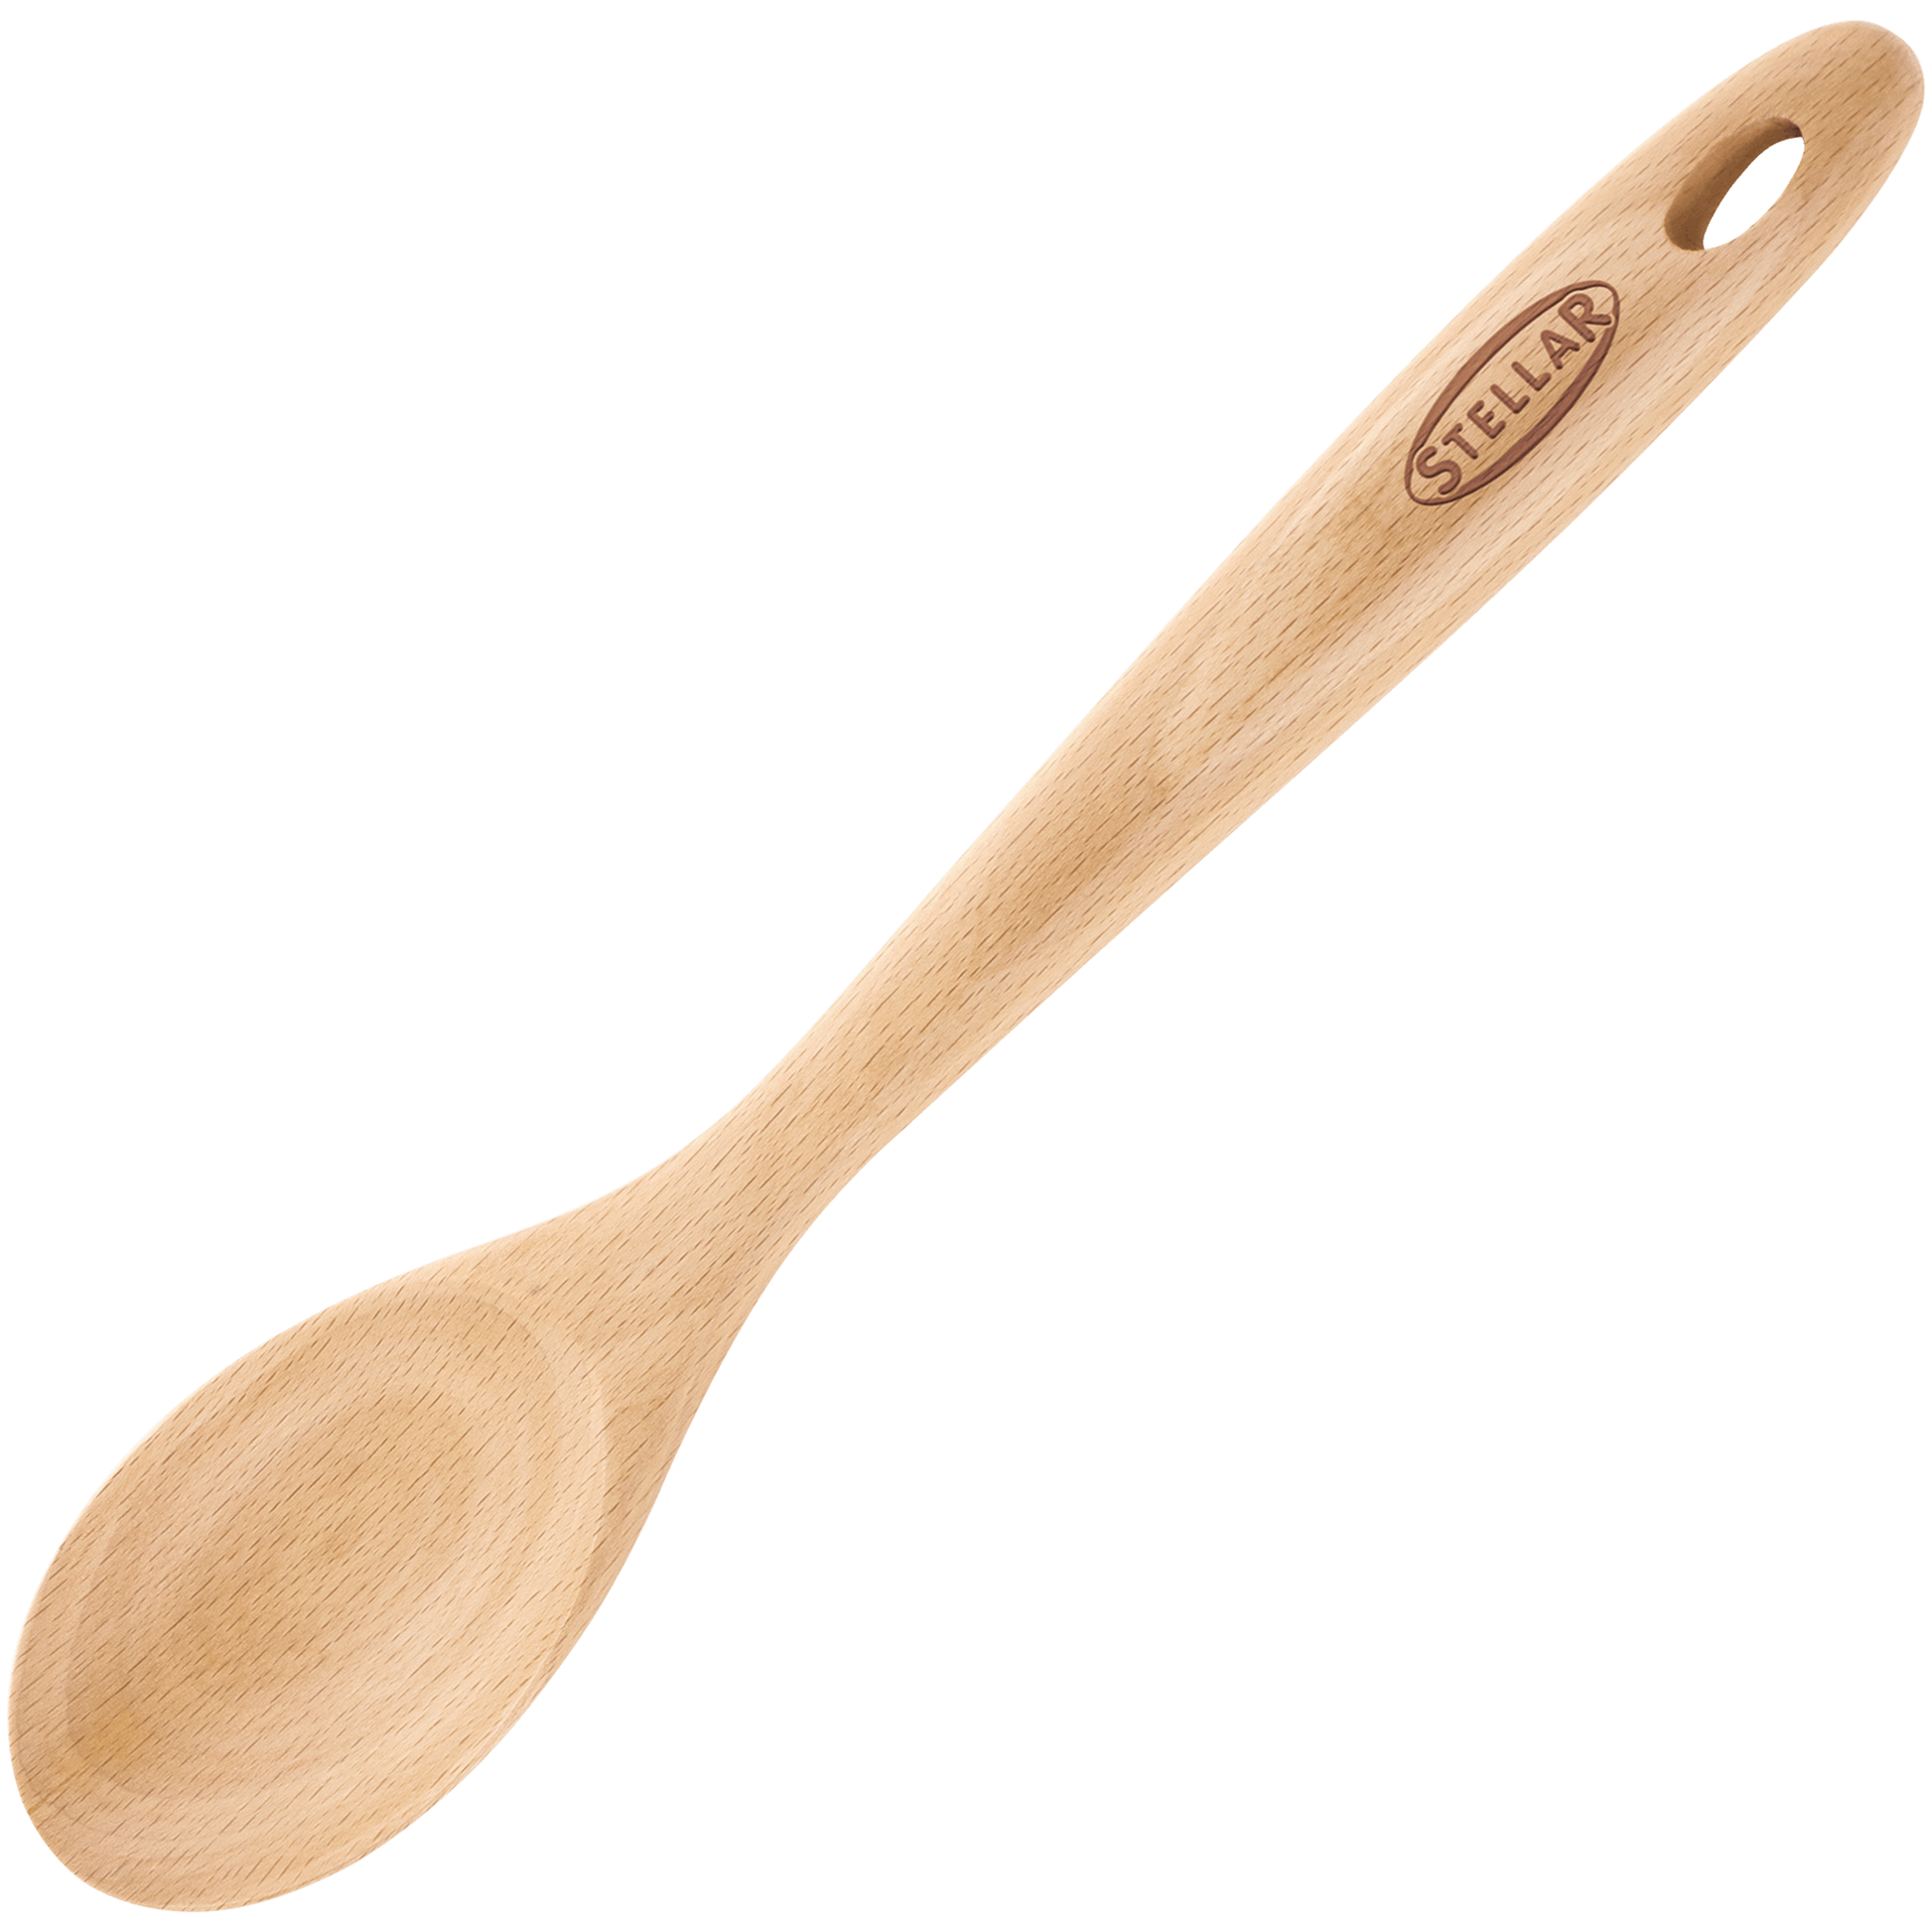 a wooden spoon with the Stellar logo on the handle